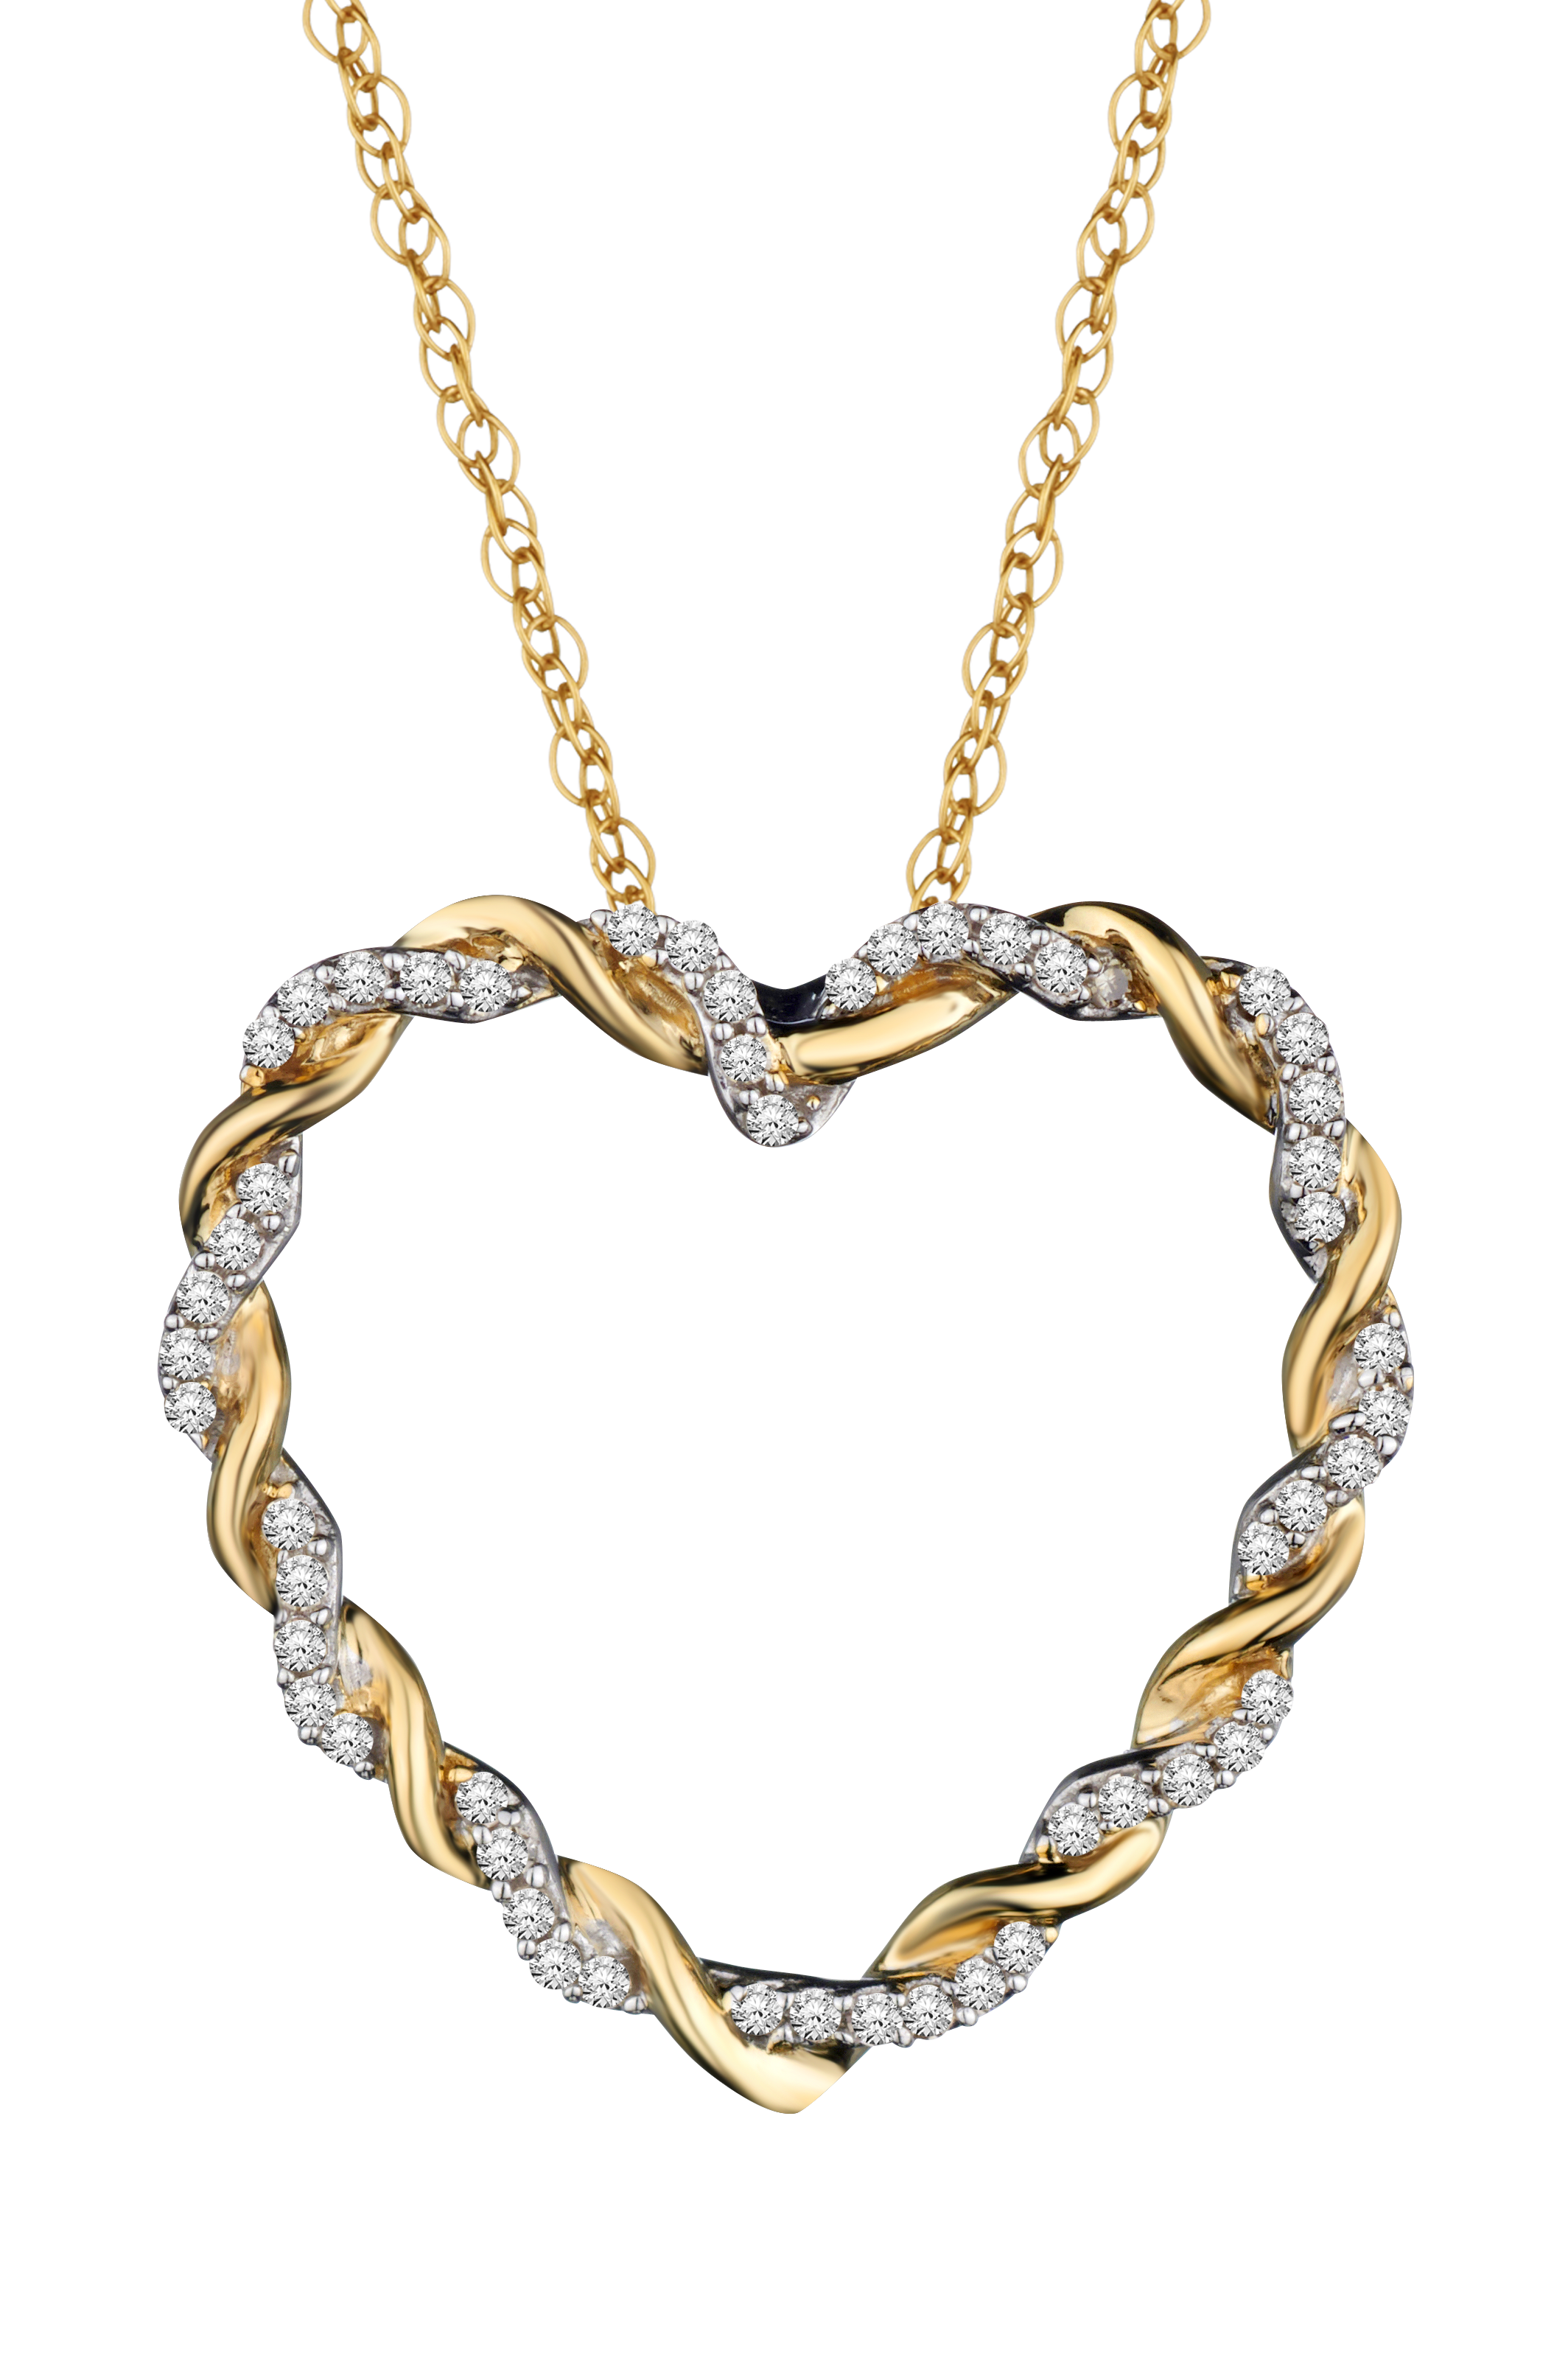 10kt Two Tone, .14 Carat of Diamonds, "Entwined" Heart pendant.....................NOW